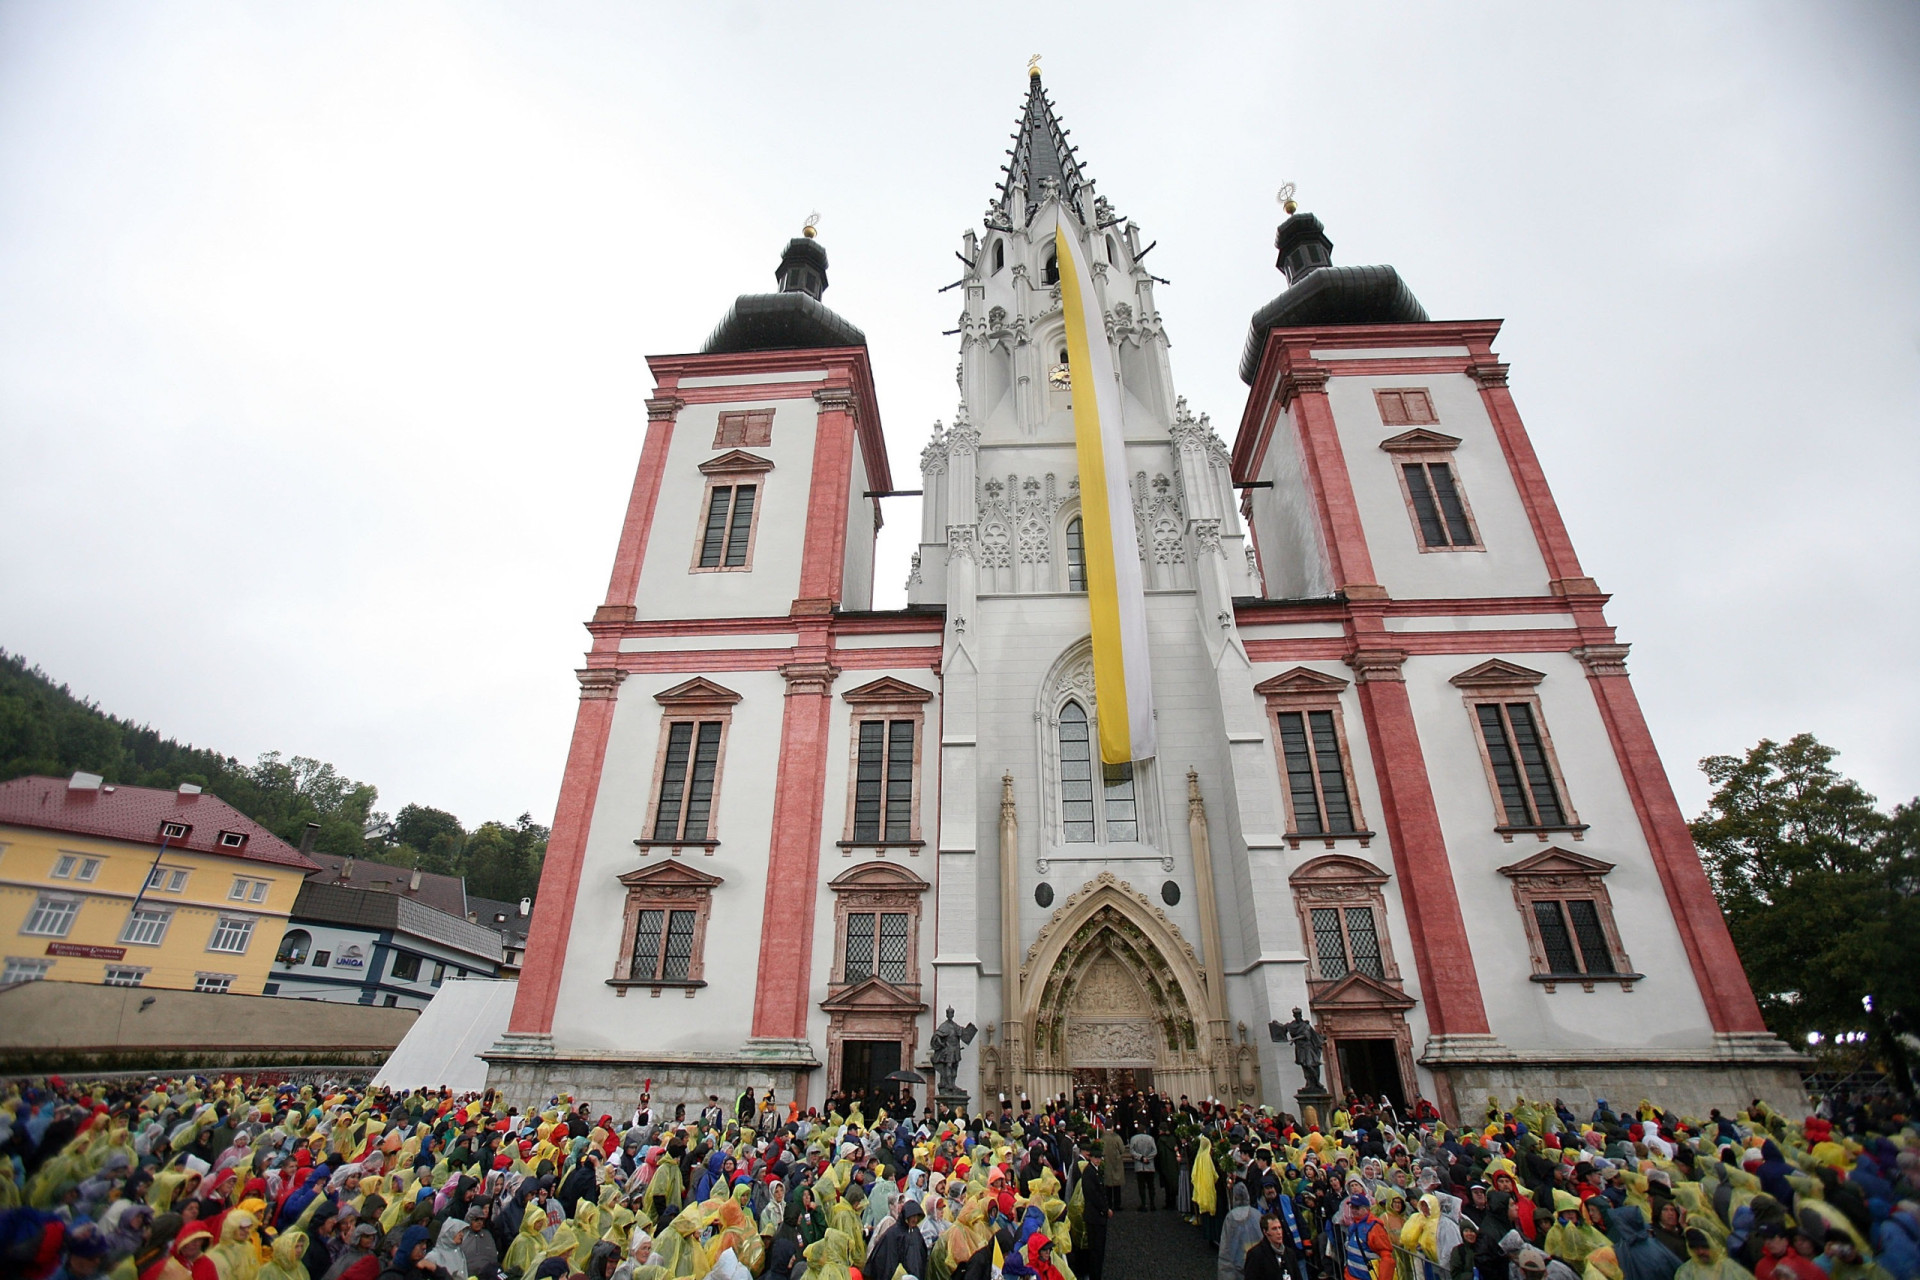 <p>The most popular pilgrimage destination in Austria, the Mariazell Basilica contains a 23-inch (50-cm) high wooden statue of the Virgin Mary with child. It's one of the most visited shrines in Europe.</p><p><a href="https://www.msn.com/en-us/community/channel/vid-7xx8mnucu55yw63we9va2gwr7uihbxwc68fxqp25x6tg4ftibpra?cvid=94631541bc0f4f89bfd59158d696ad7e">Follow us and access great exclusive content every day</a></p>